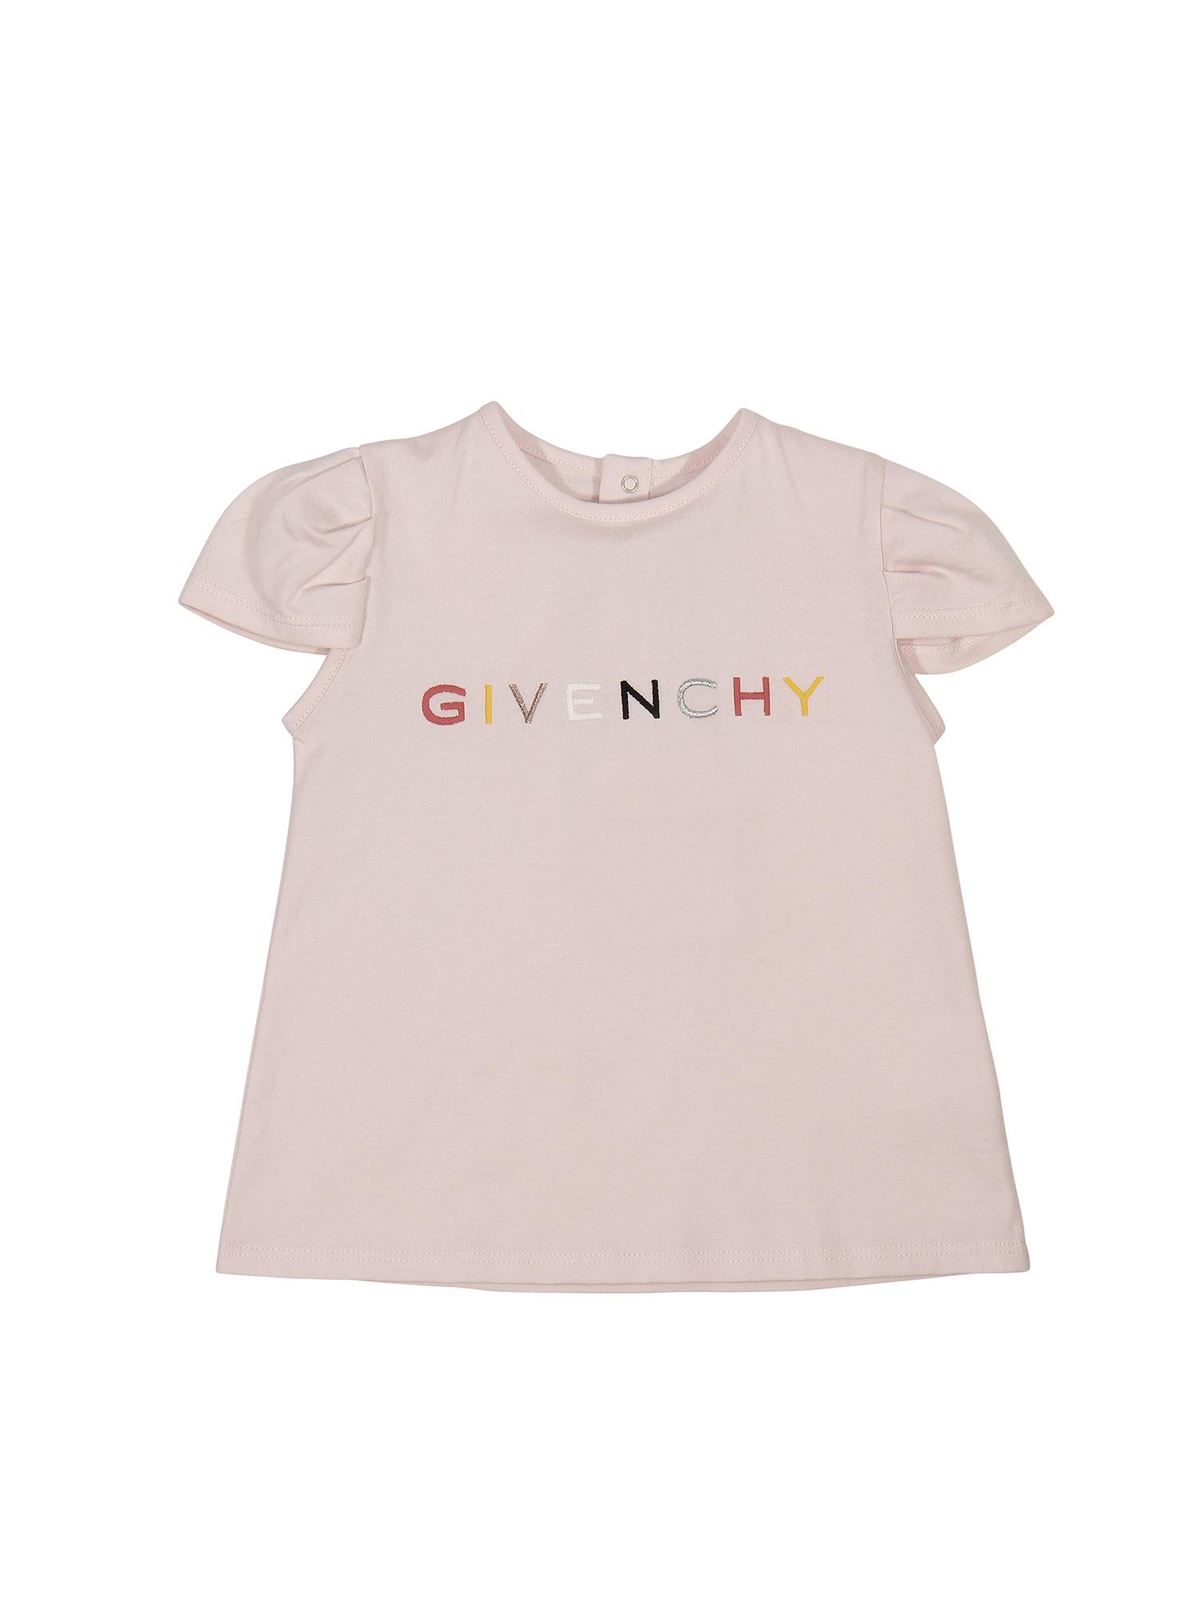 givenchy rose tee